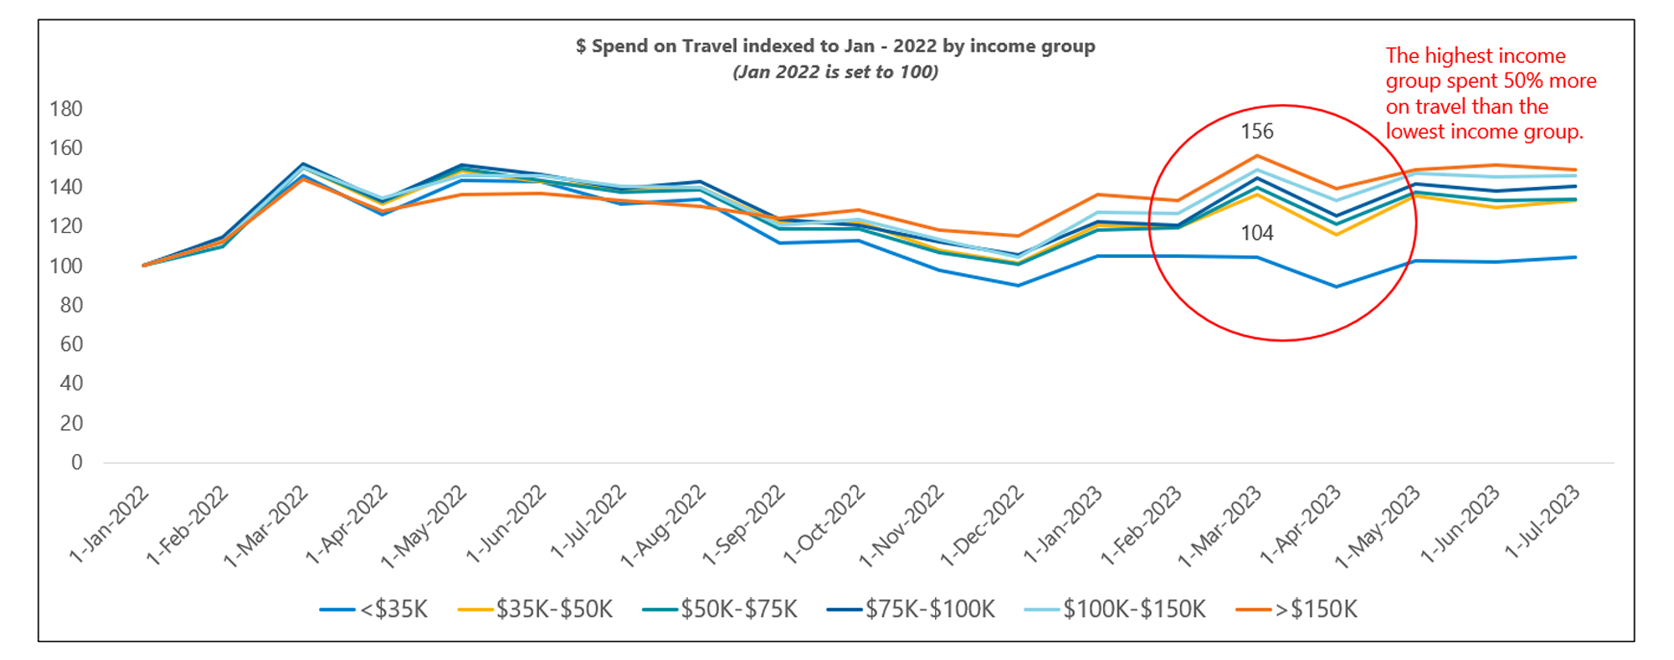 travel spend 2022 income group